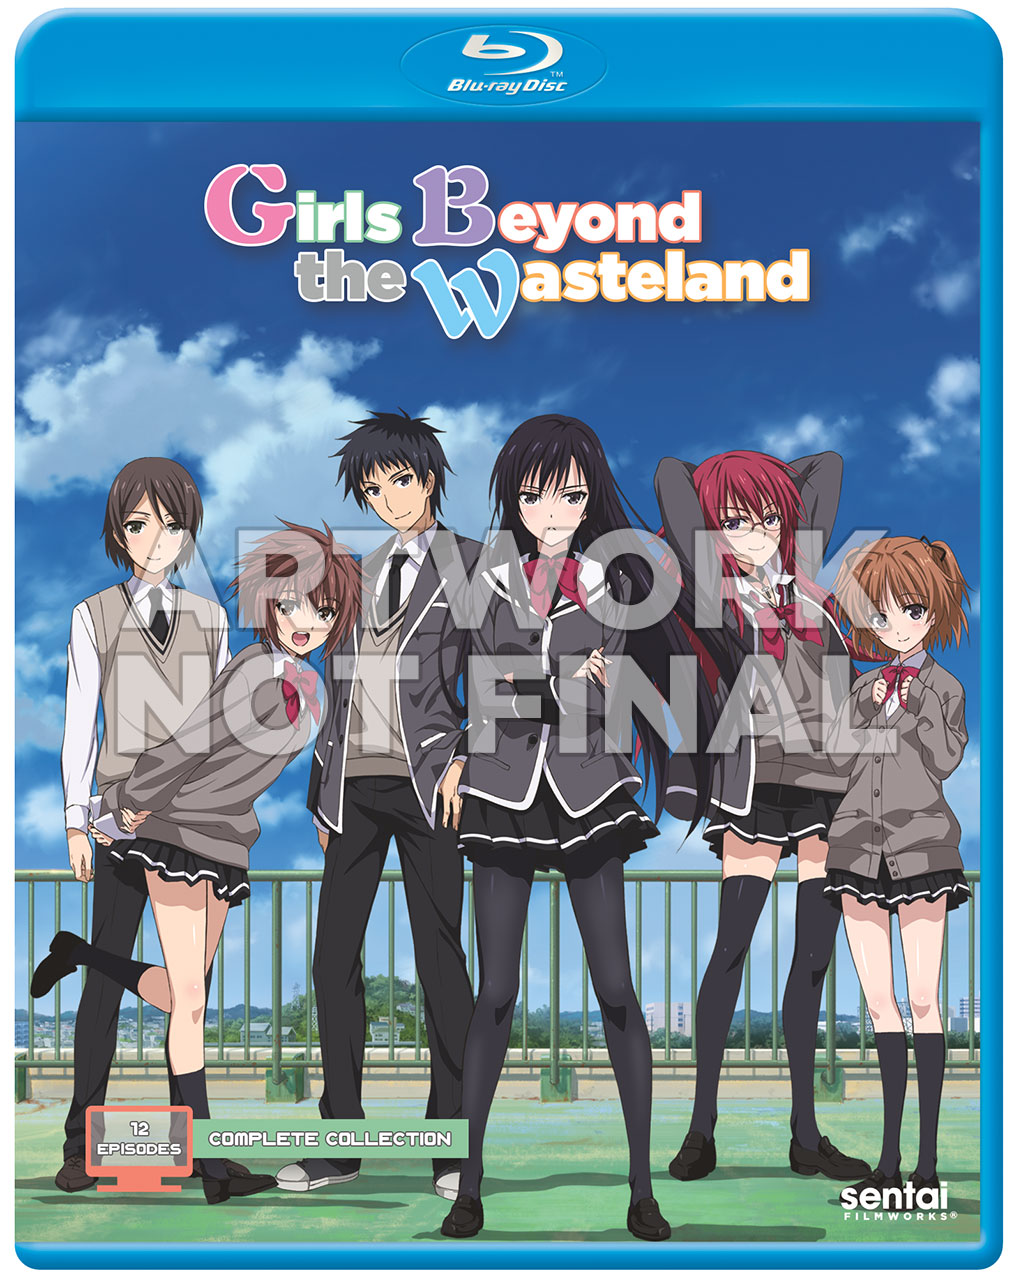 Beyond the Boundary -I'LL BE HERE-: Past - Sentai Filmworks